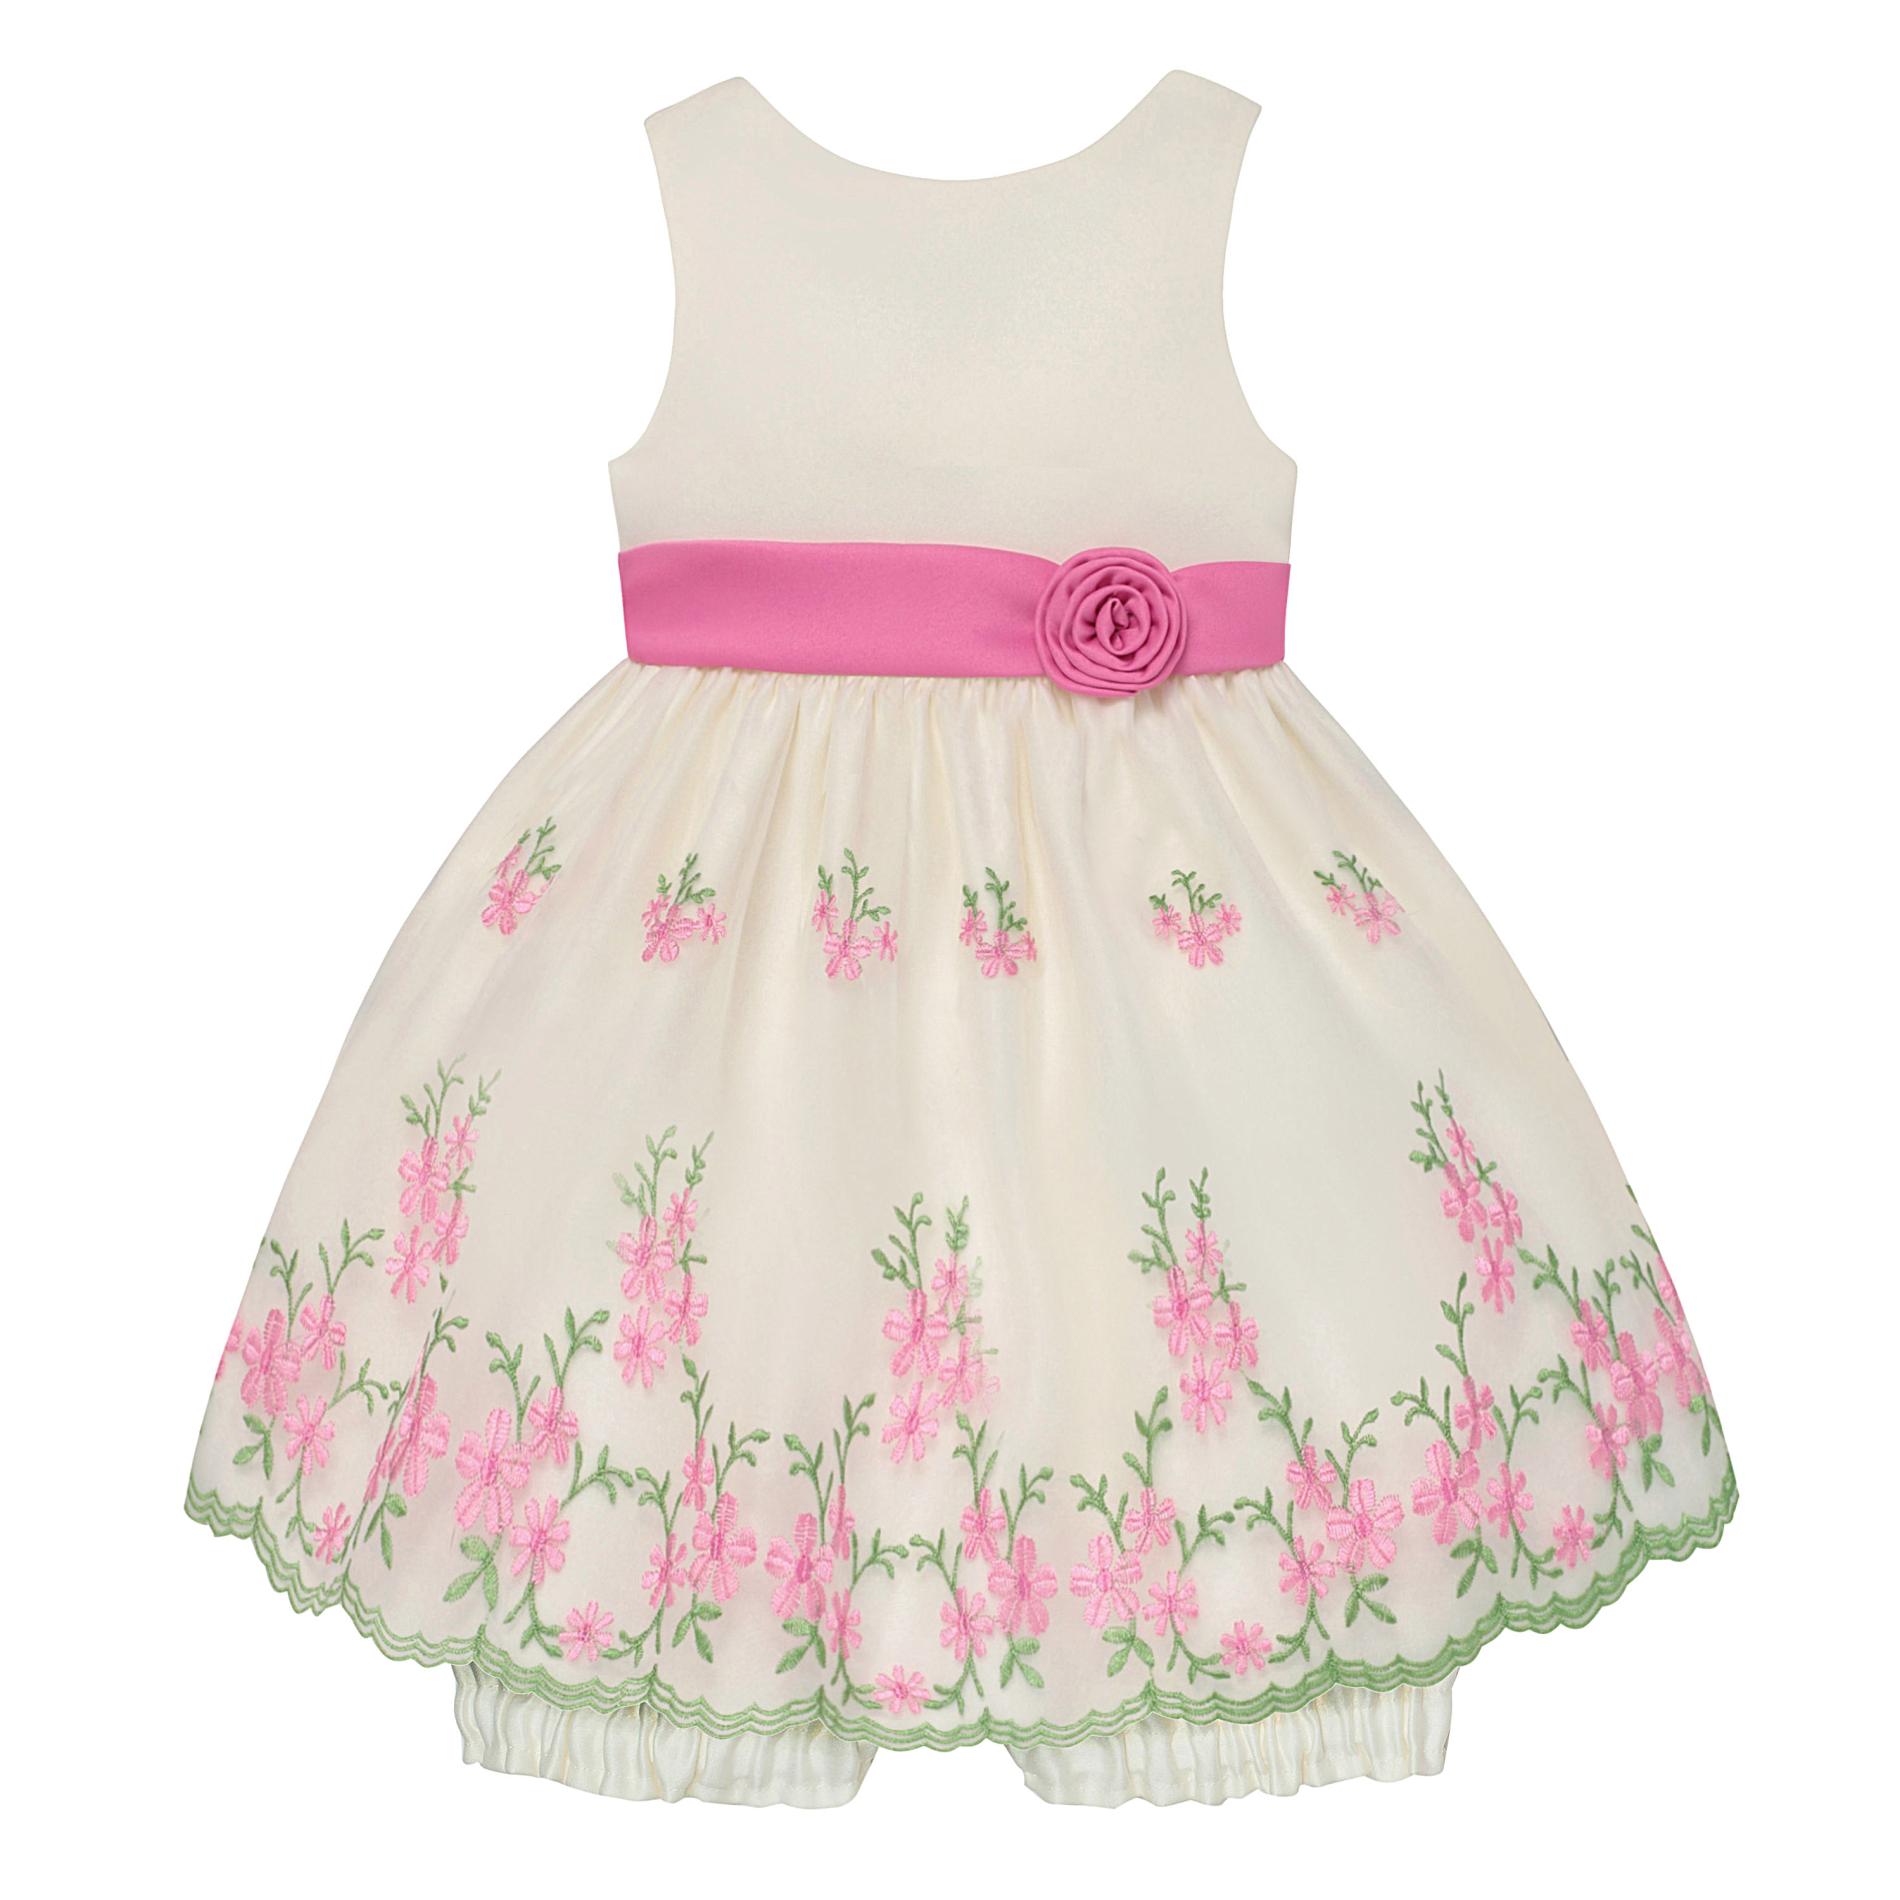 American Princess Infant & Toddler Girl's Occasion Dress